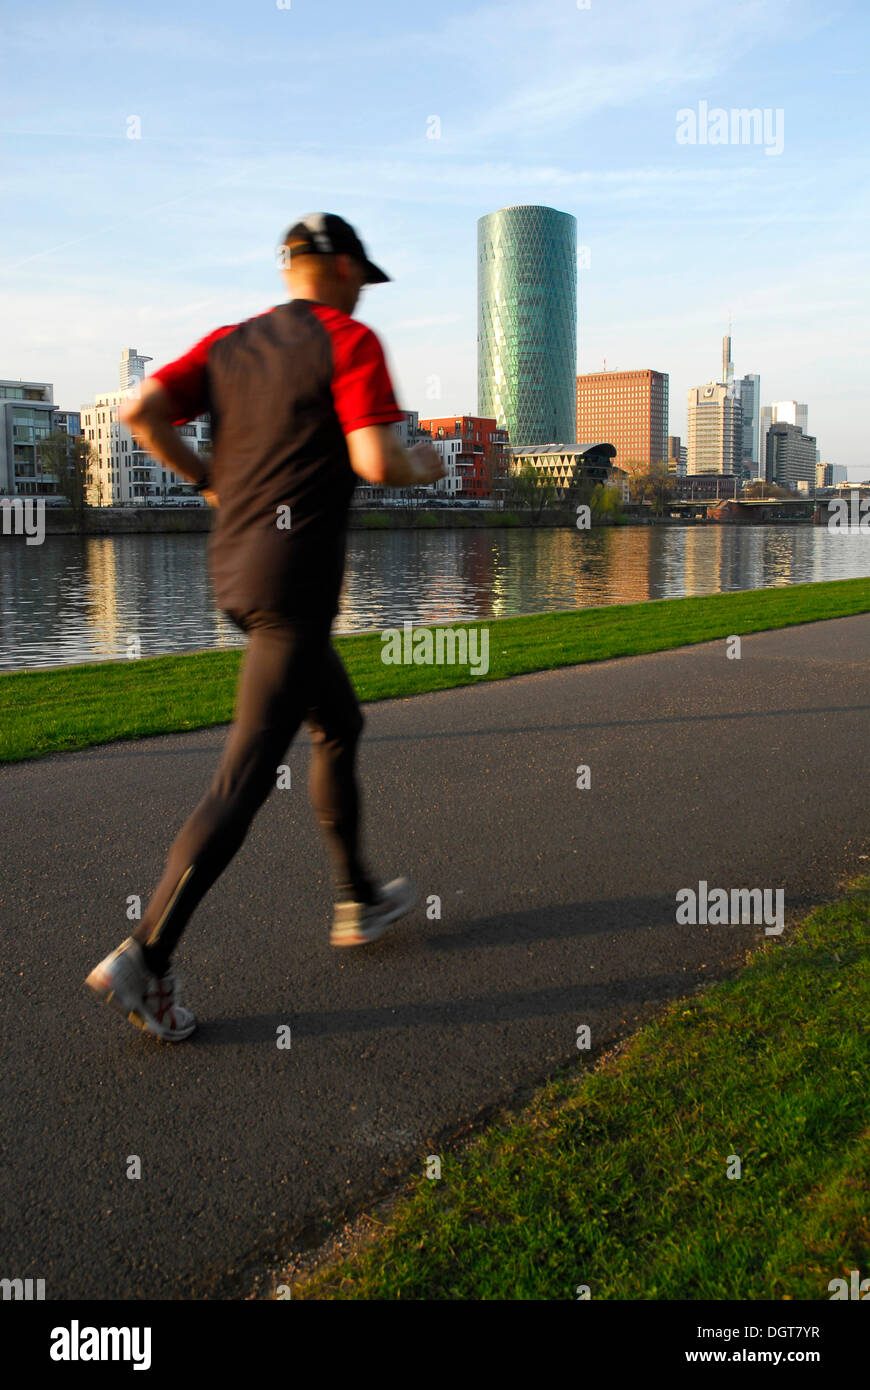 Jogger jogging along the river, Theodor Stern Kai, Westhafen Tower in the Gutleutviertel quarter, skyline of the office district Stock Photo